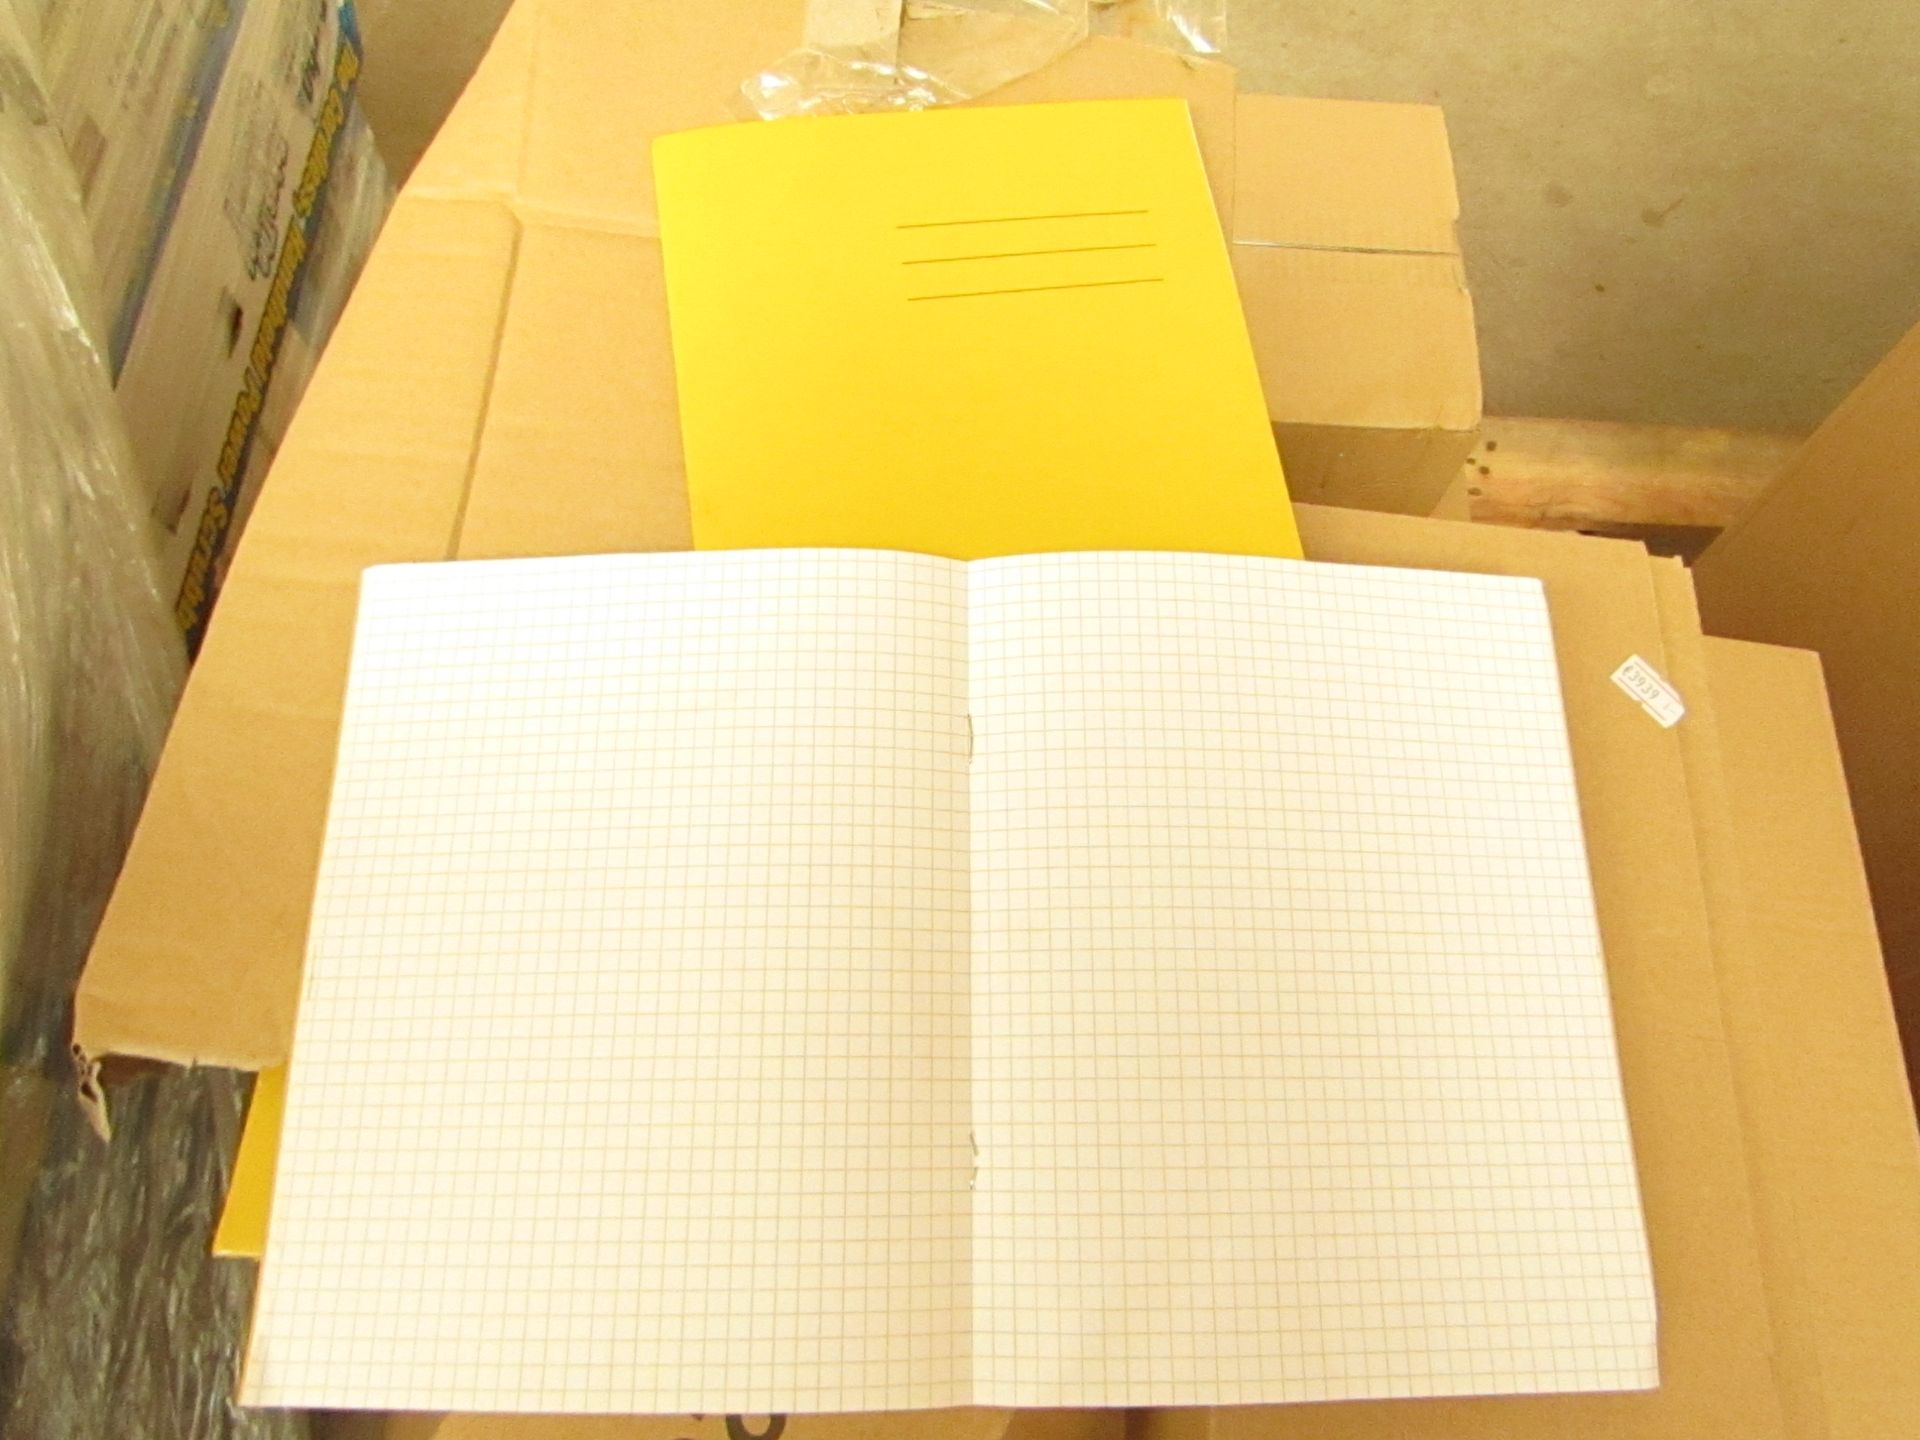 Box of 100 Exercise Books. See Image for Design. Unused & Boxed